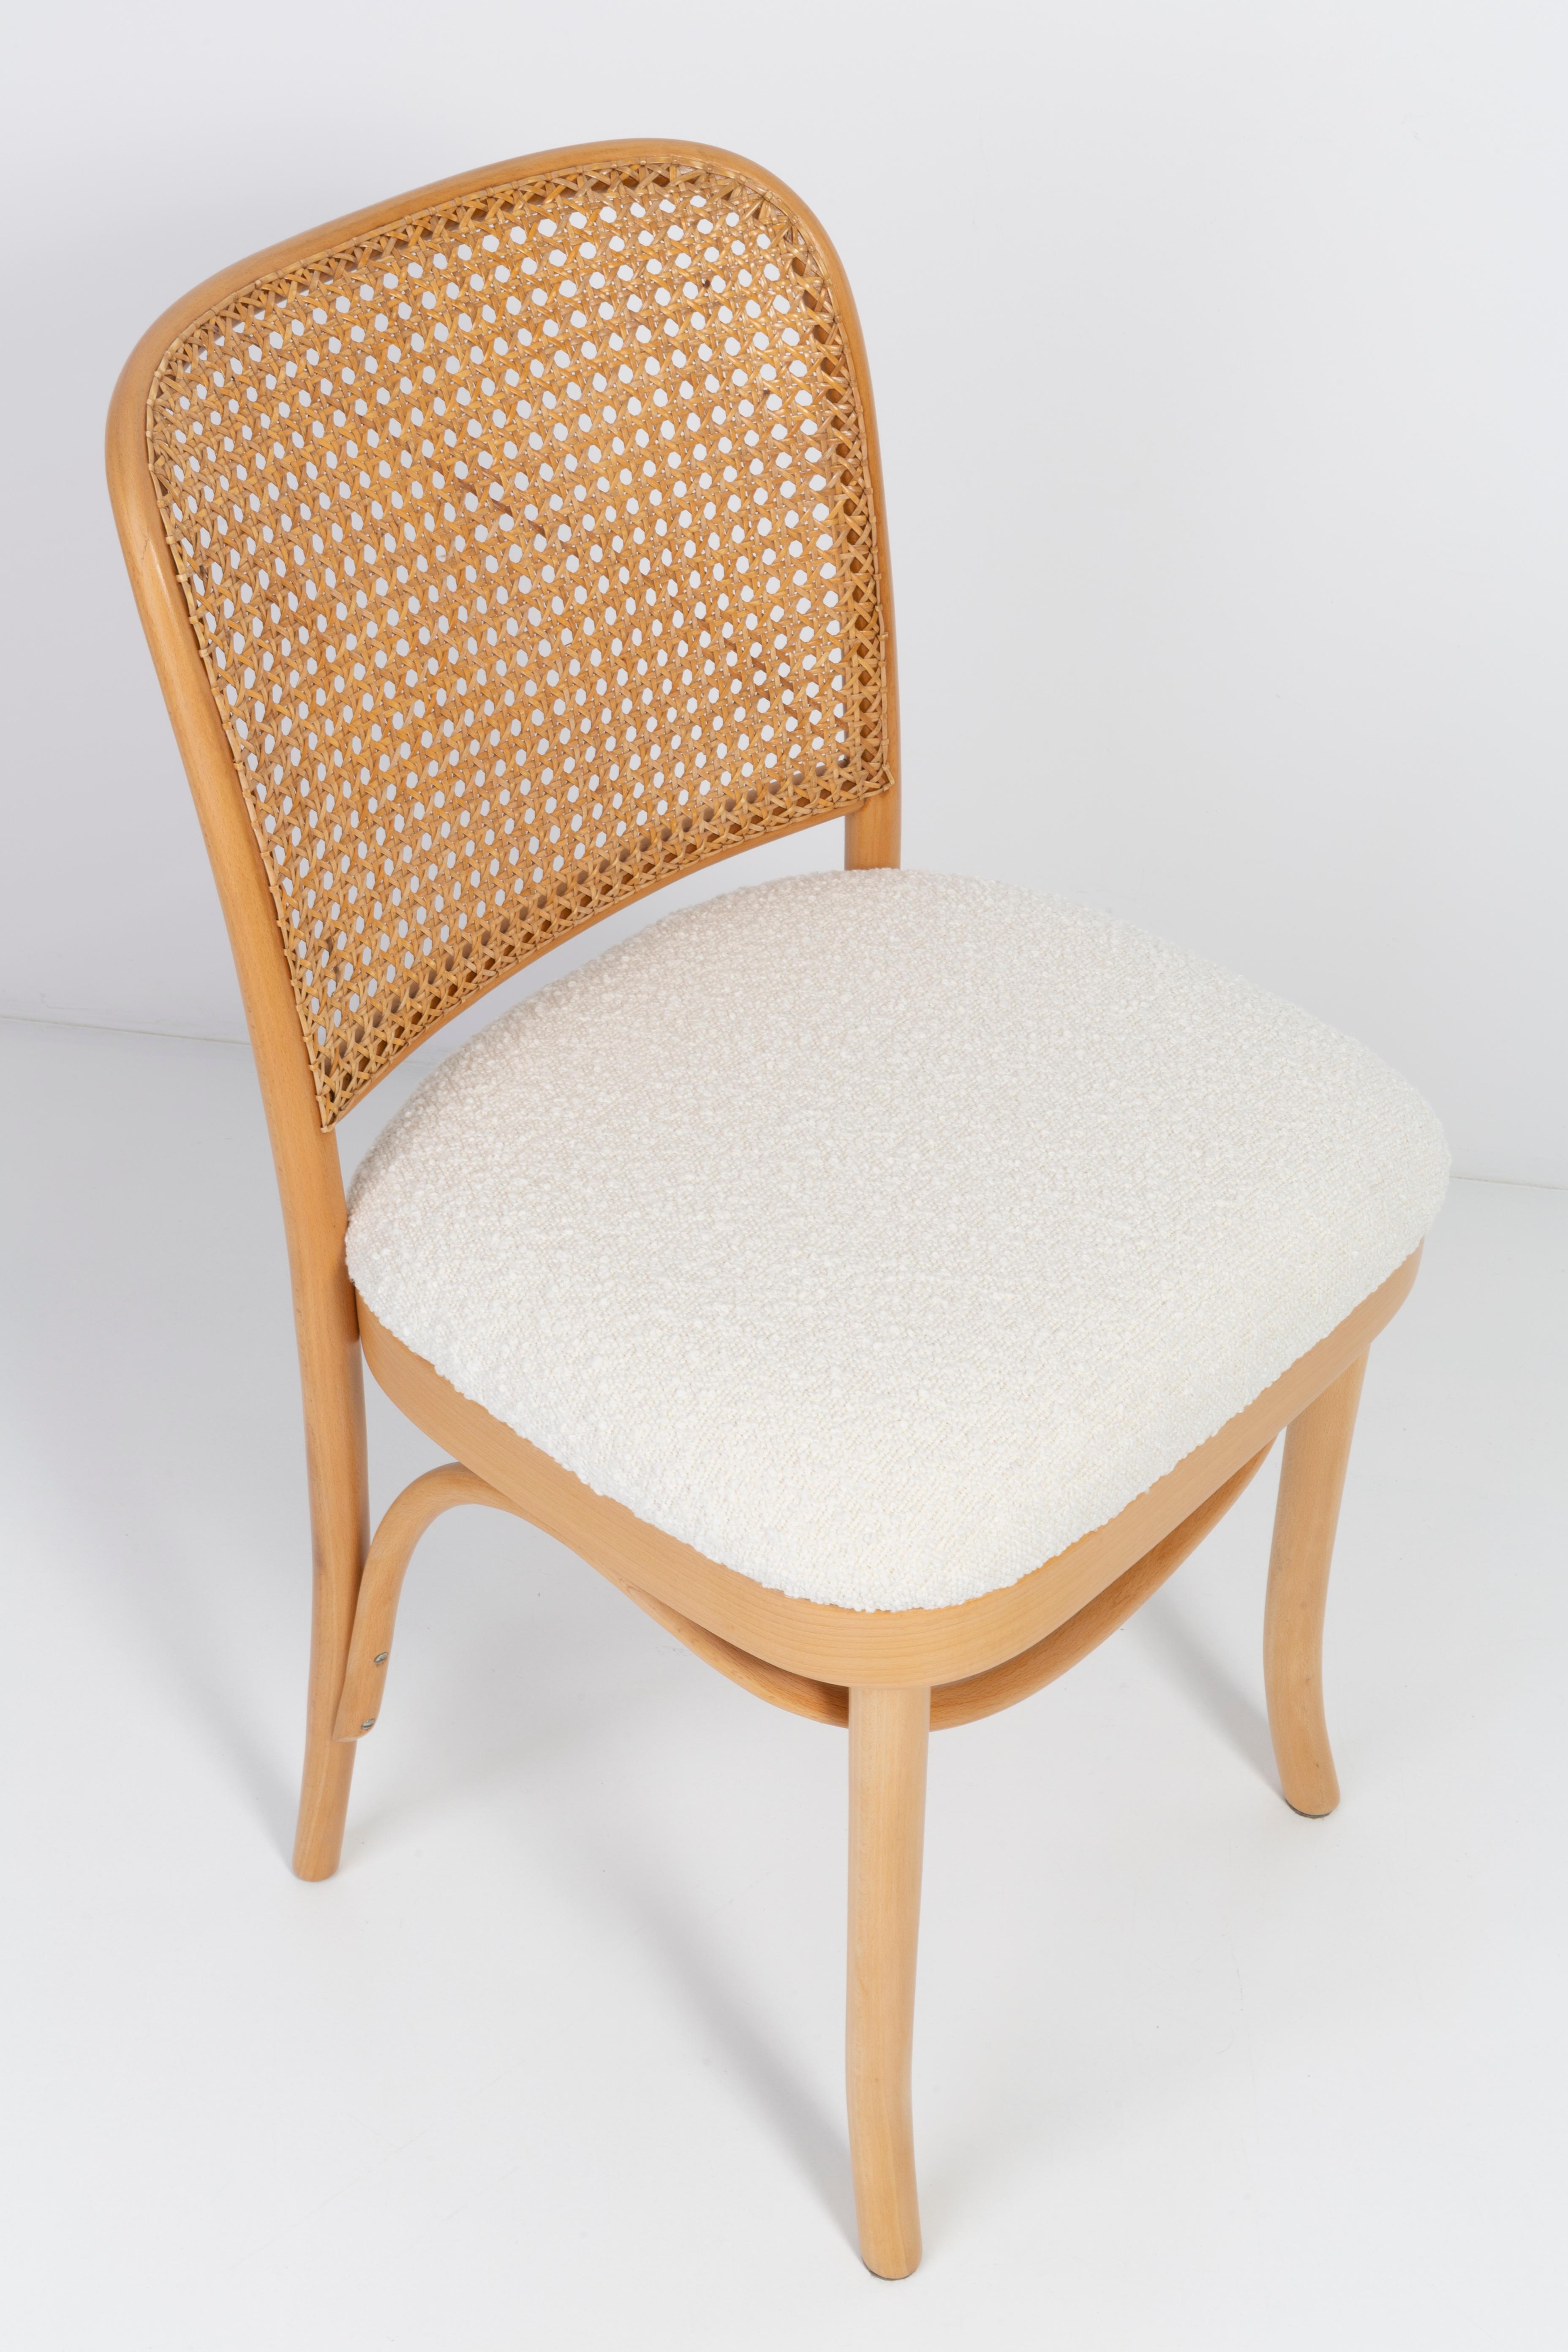 Light White Boucle Thonet Wood Rattan Chair, 1960s For Sale 4